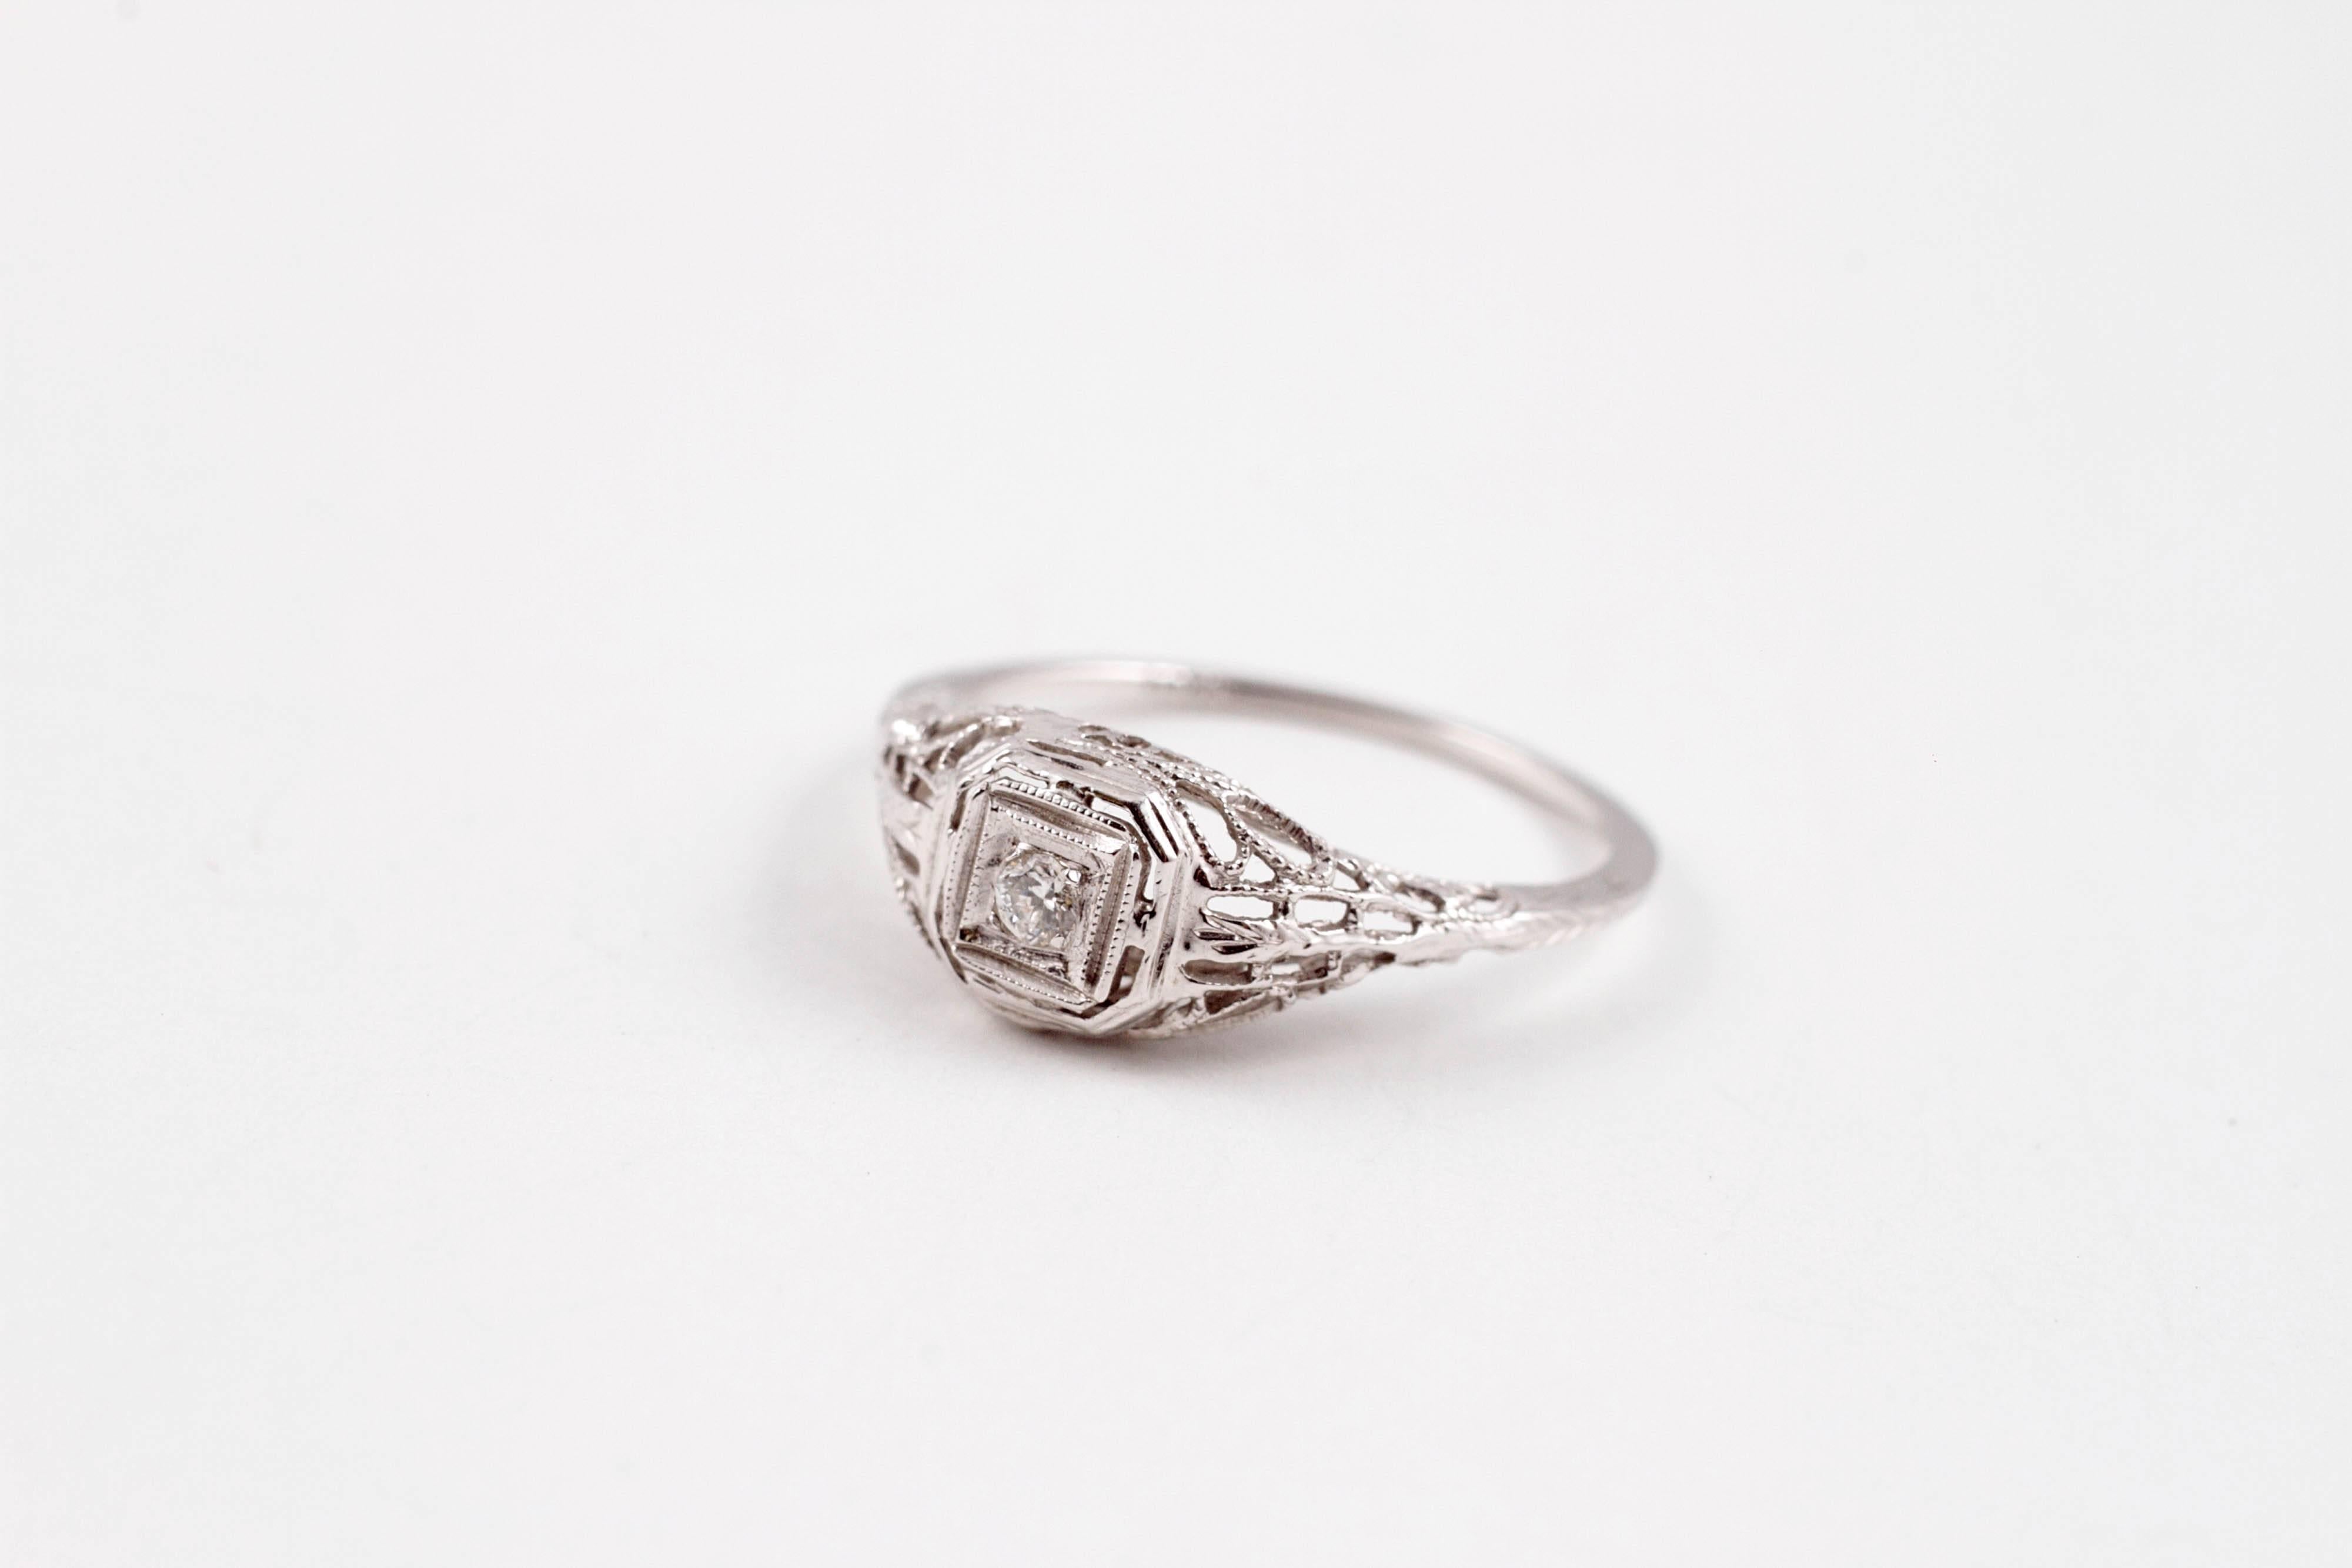 Beautiful Art Deco white gold diamond ring!  Centered with a 0.05 ct diamond, in a size 5 3/4. 